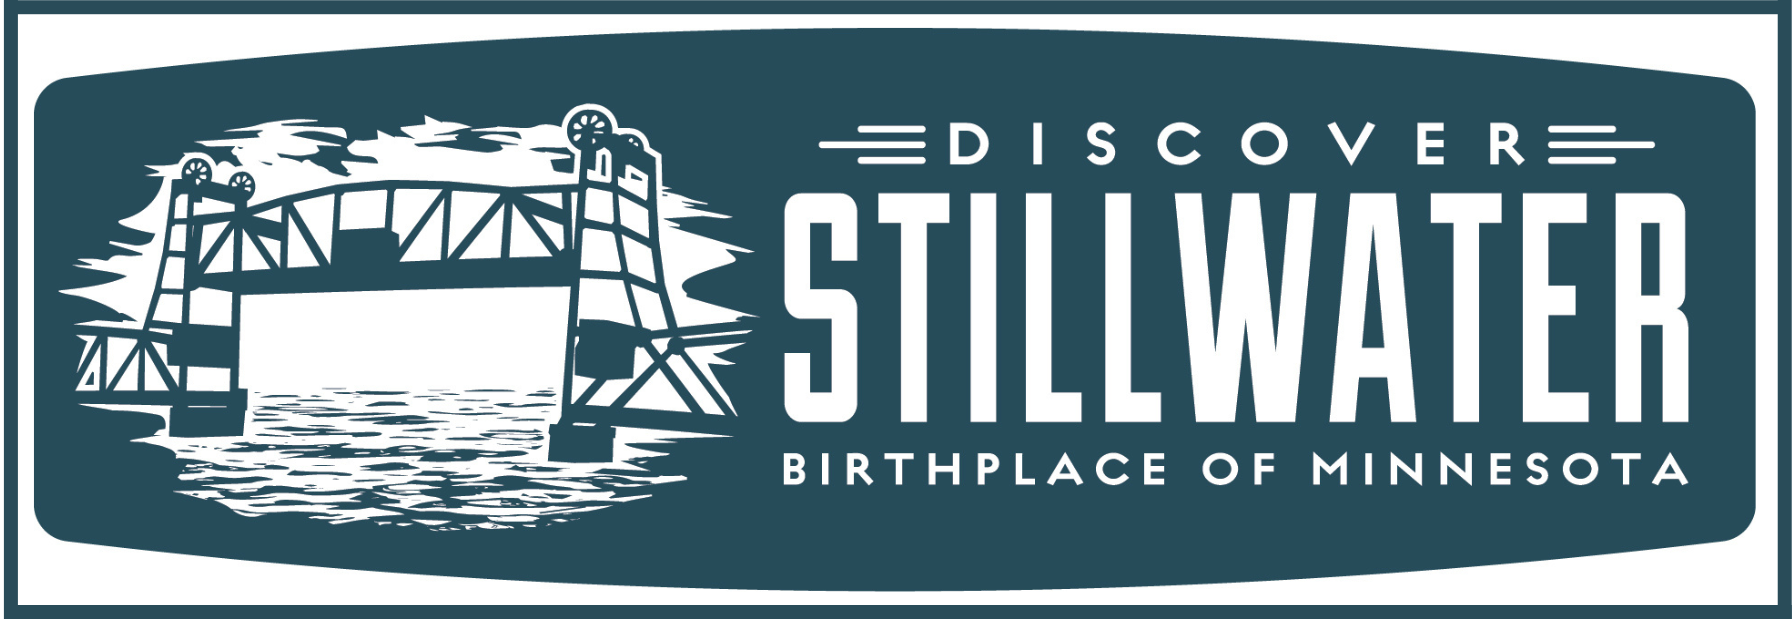 DiscoverStillwater with Border